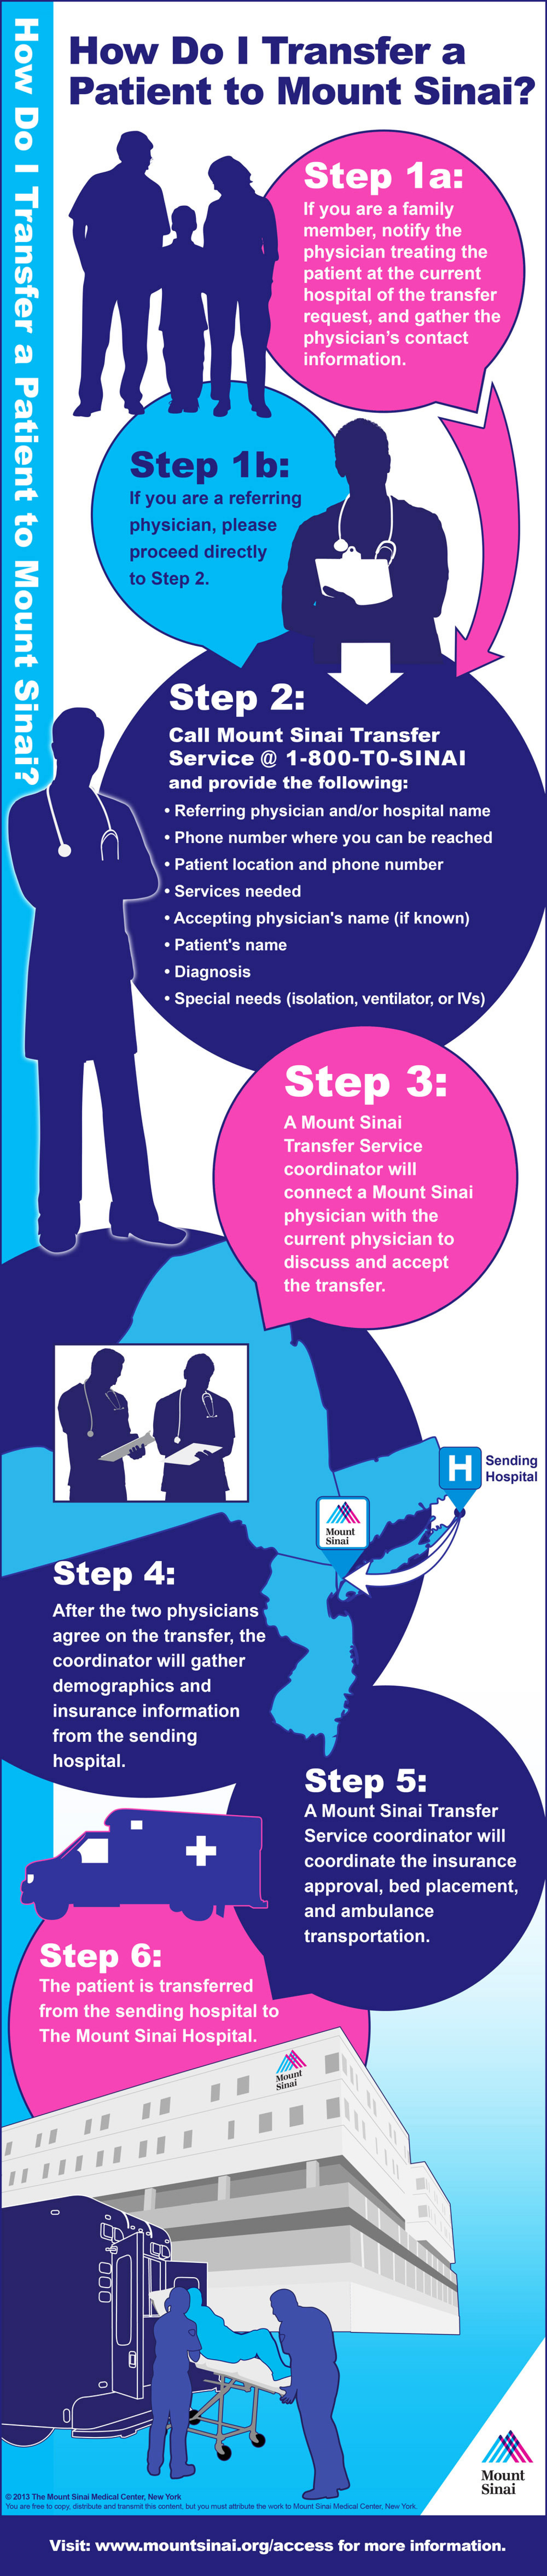 Transferring a Patient to Mount Sinai Infographic